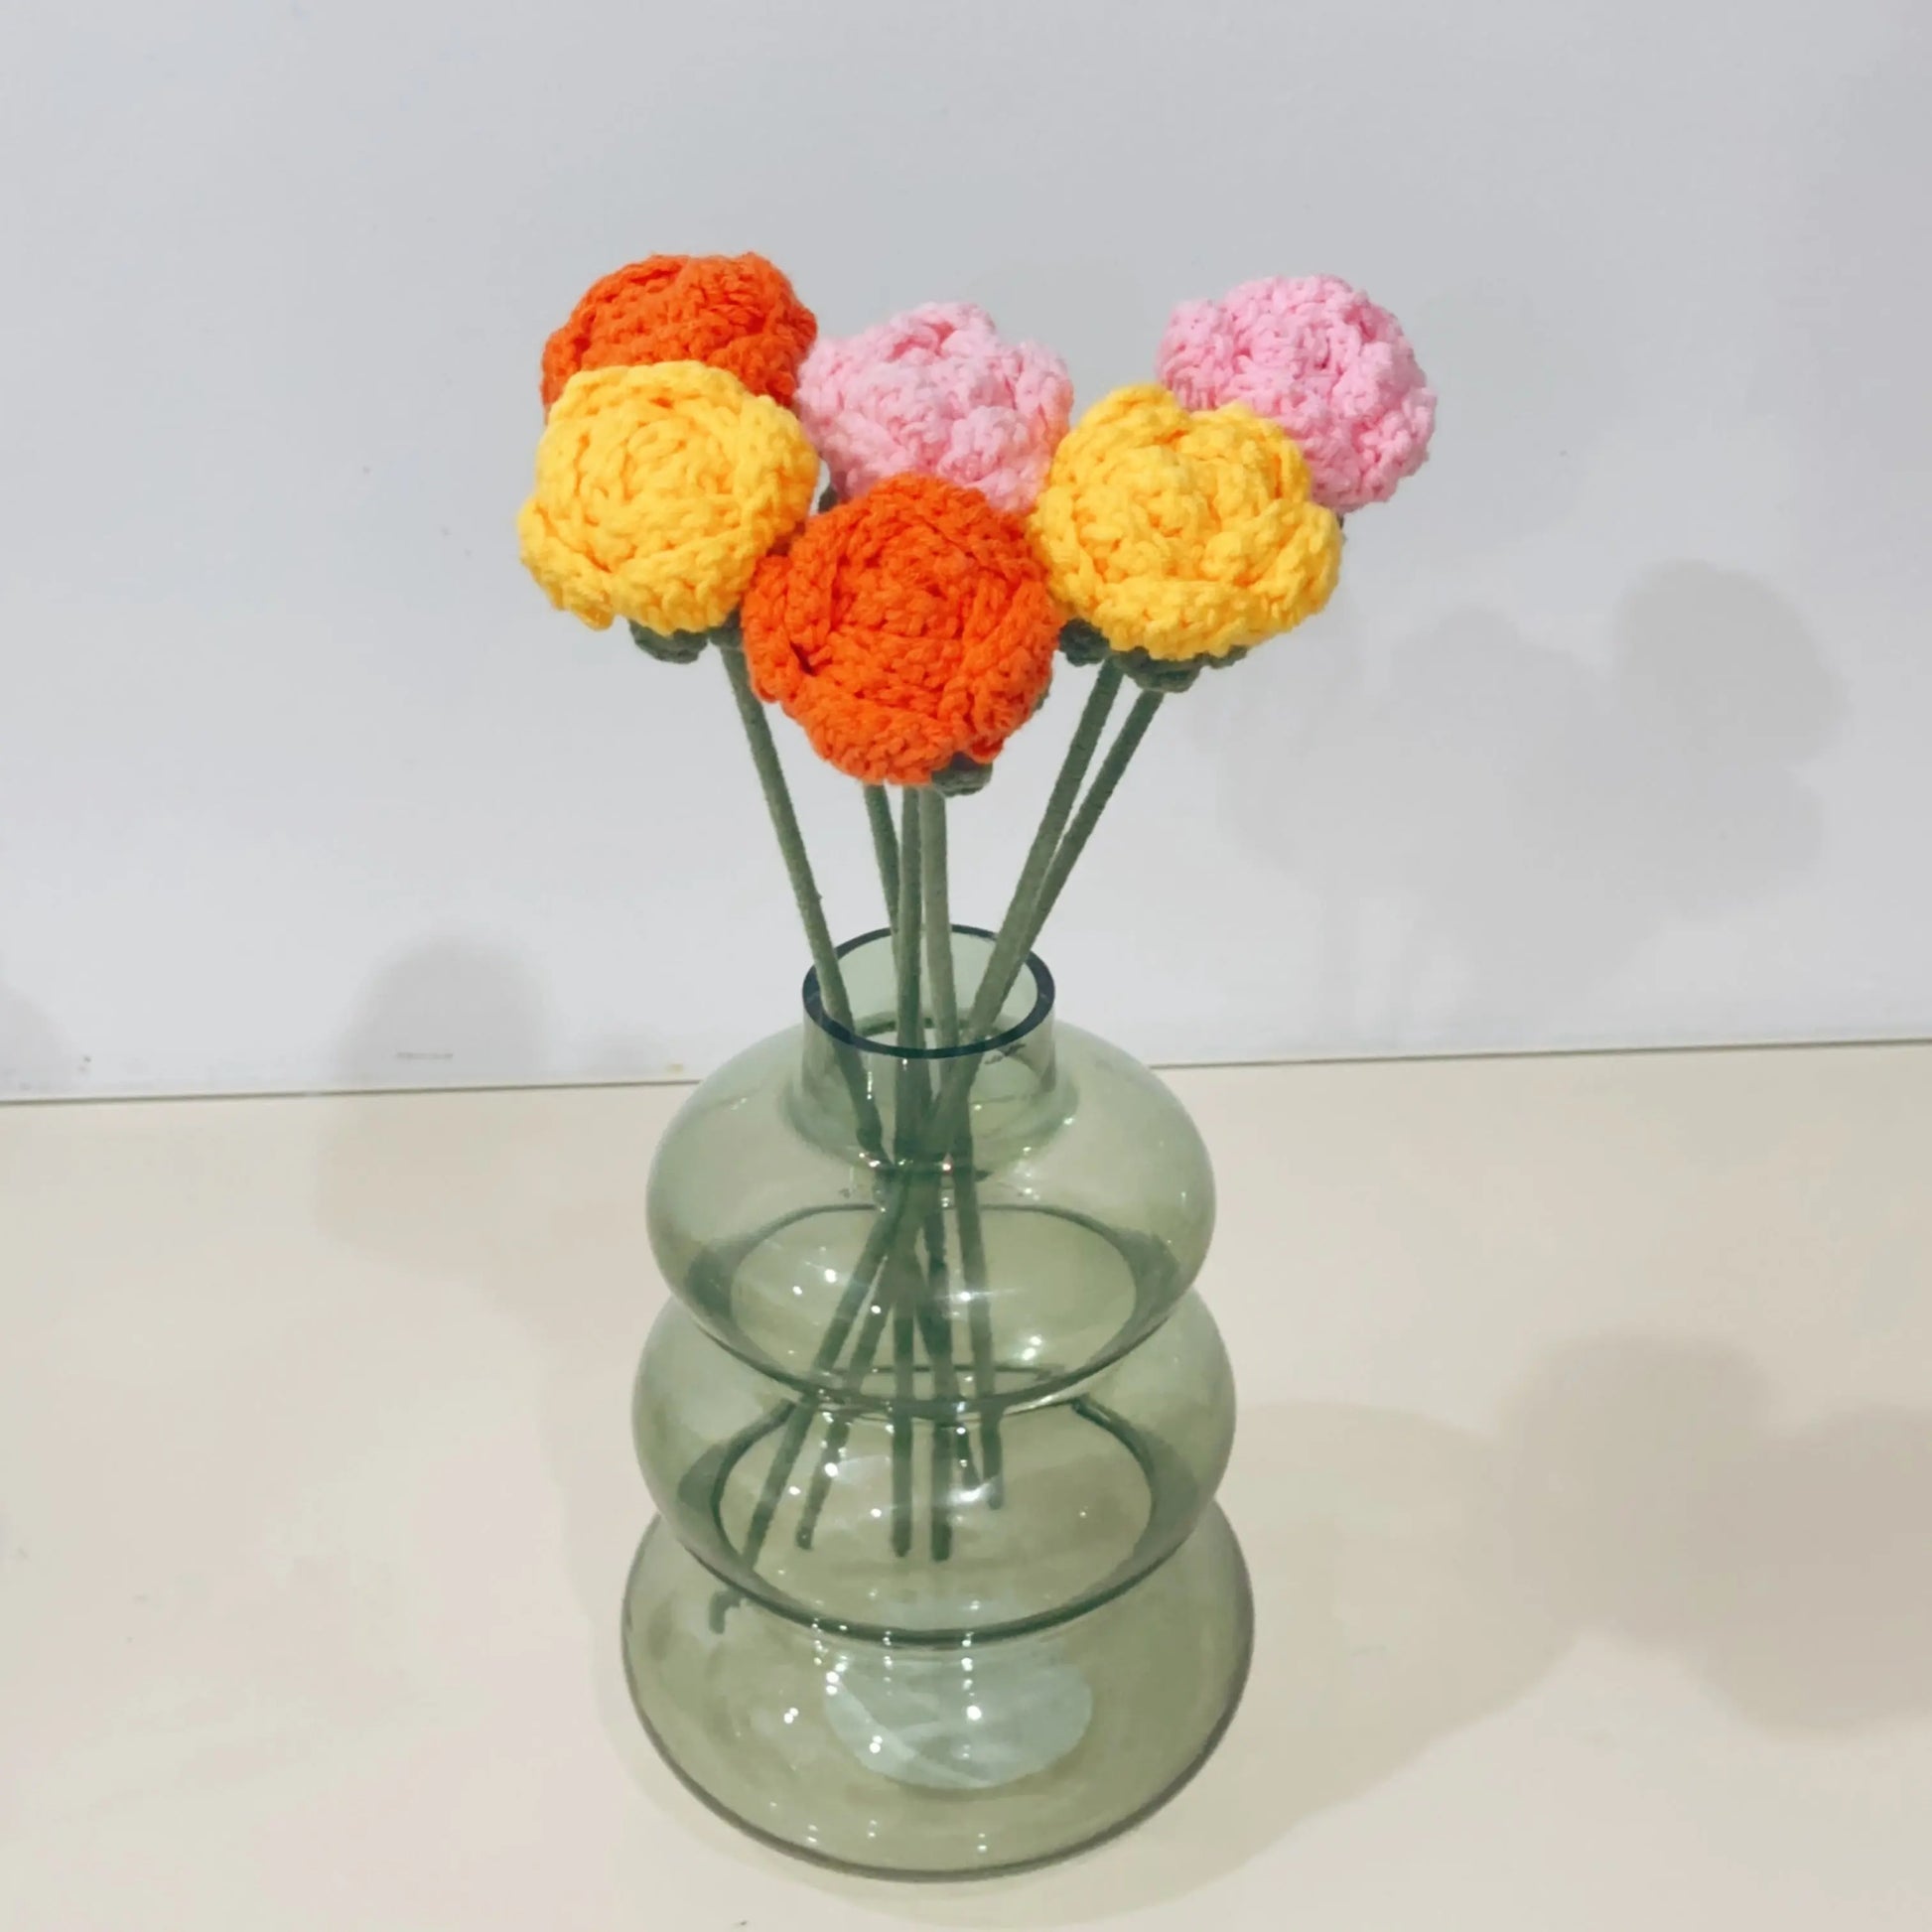 Hand knitted Woolen Small Roses Sunday's Creative